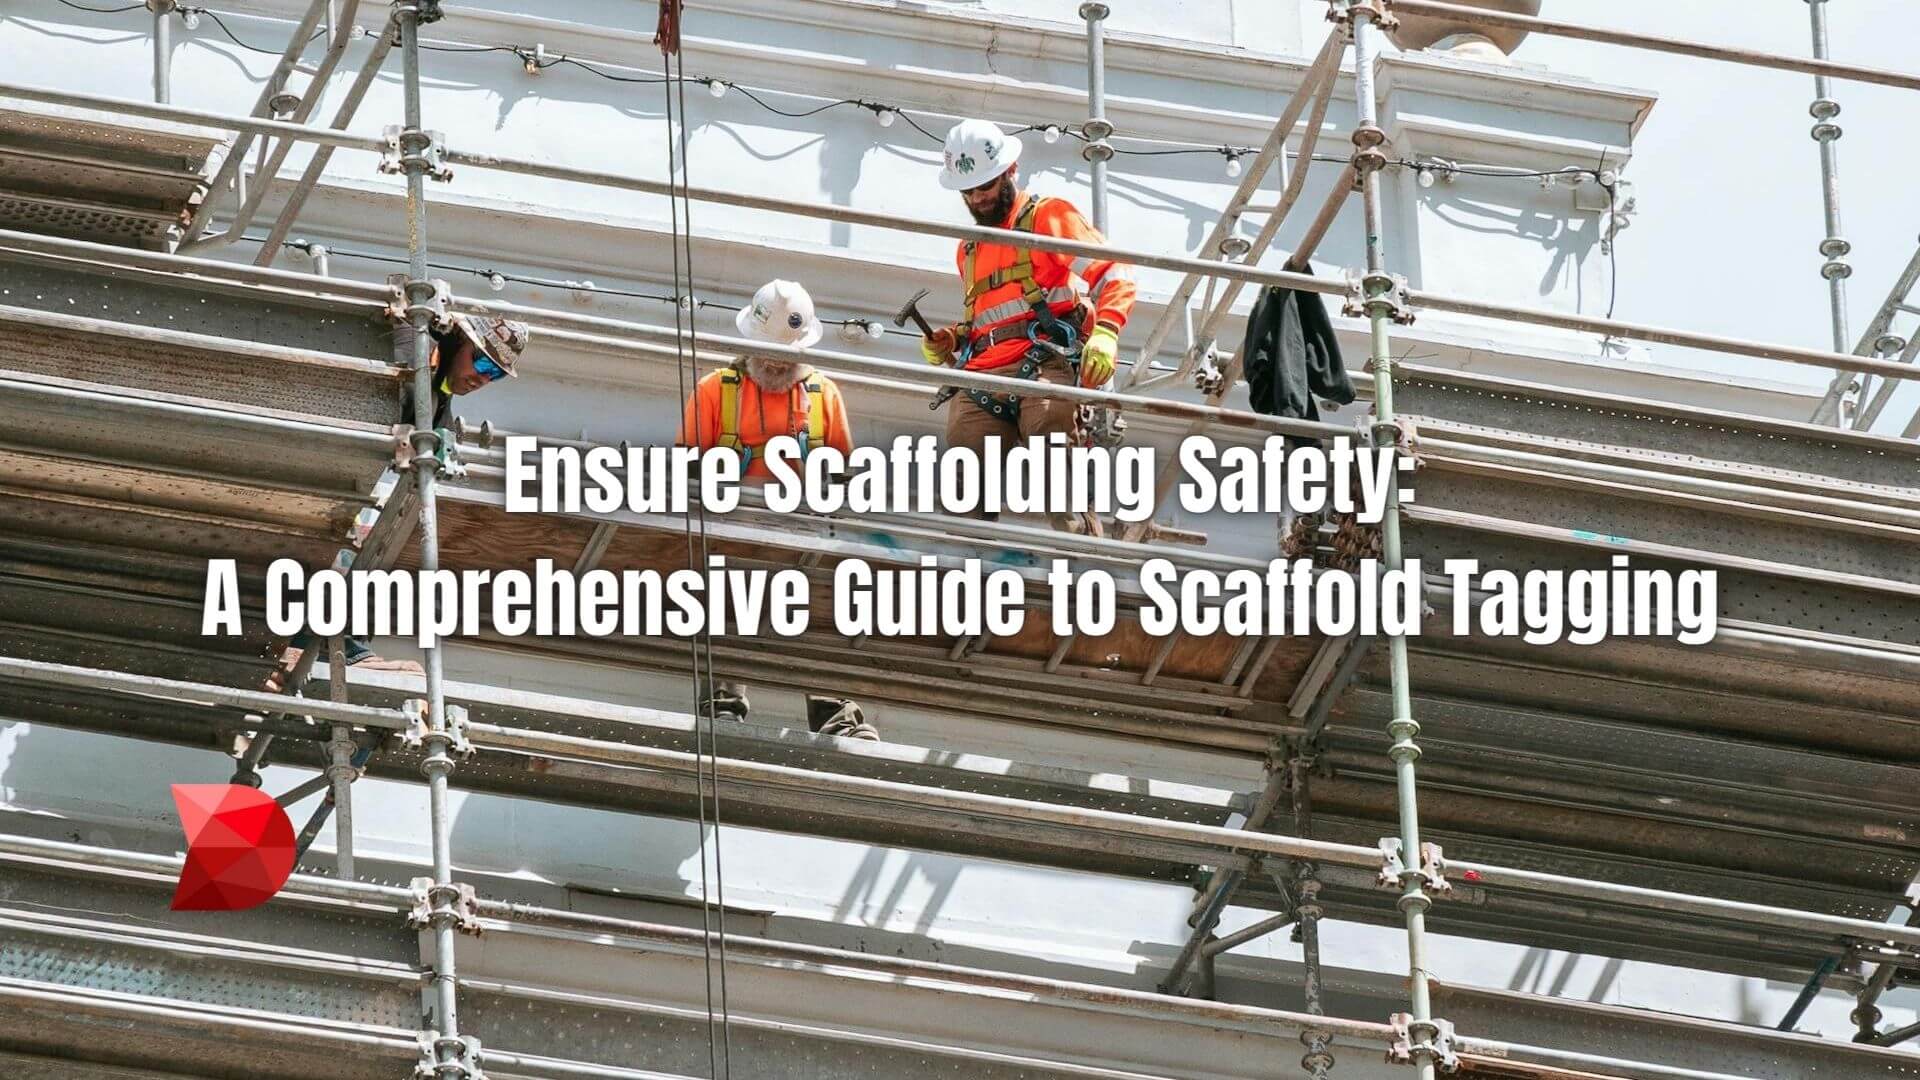 Discover the essential steps for scaffolding safety in our full guide. Learn all about scaffold tagging and ensure workplace safety today!